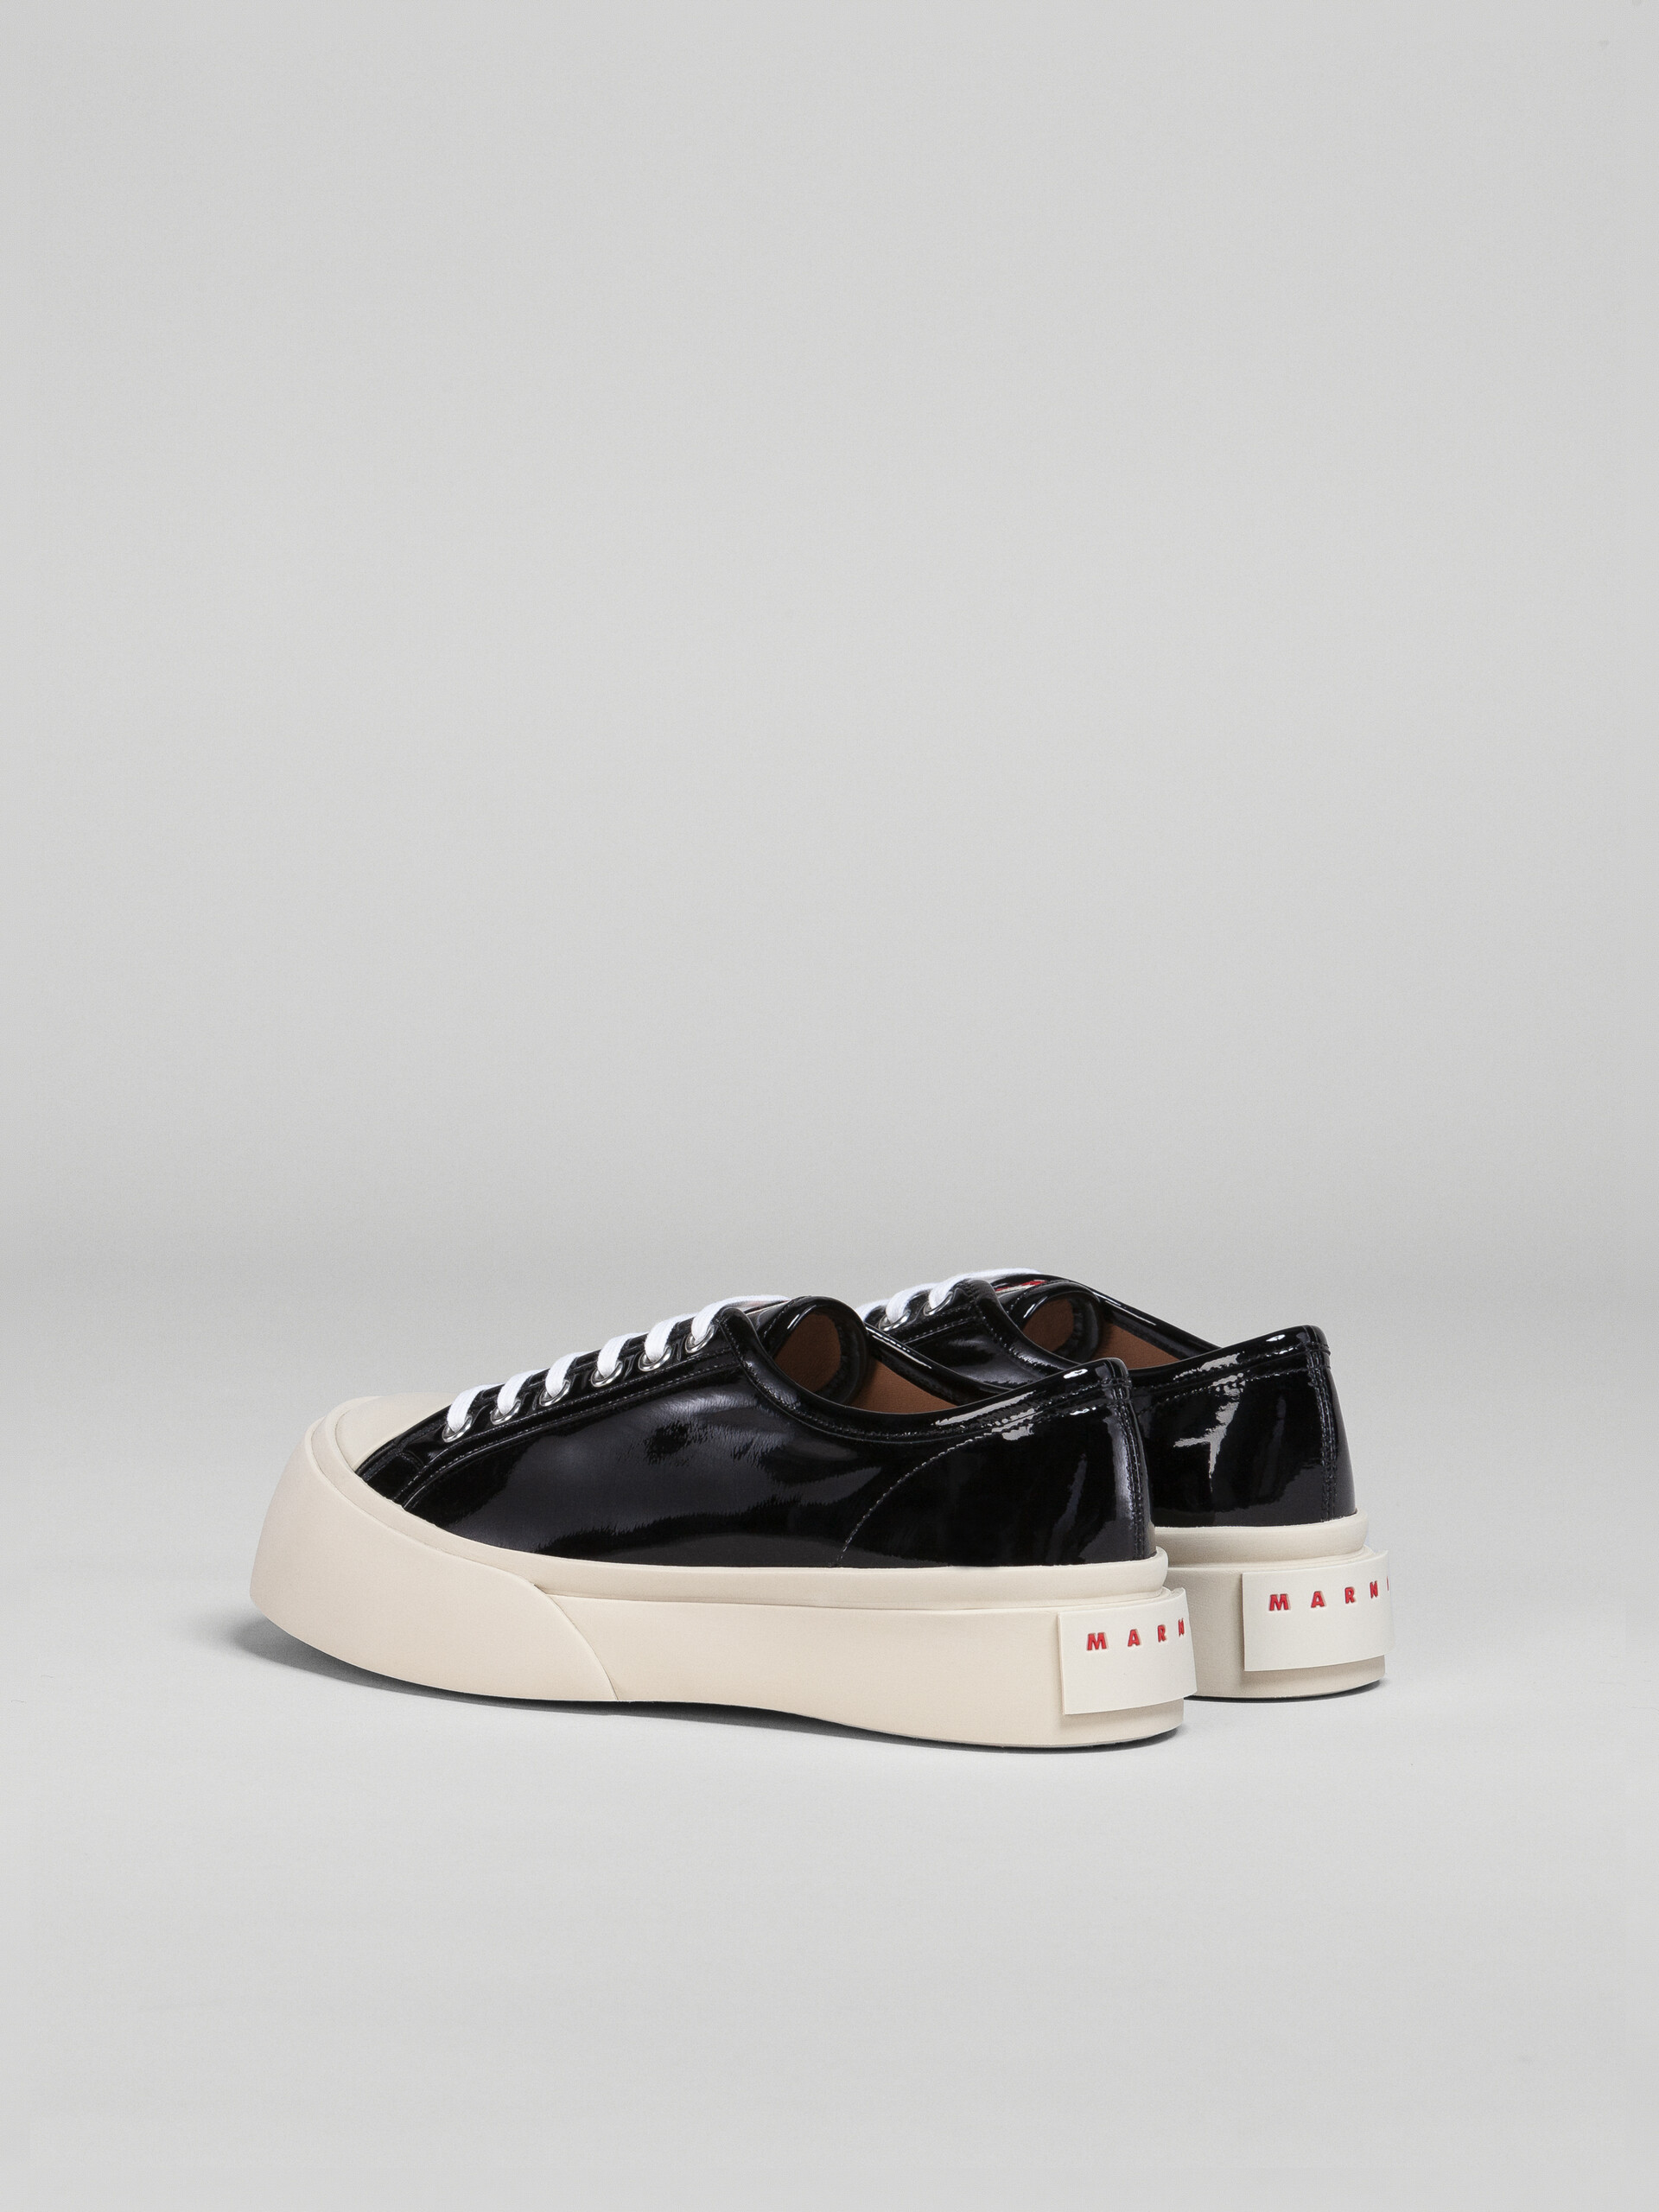 Black patent leather PABLO lace-up sneaker - Sneakers - Image 3